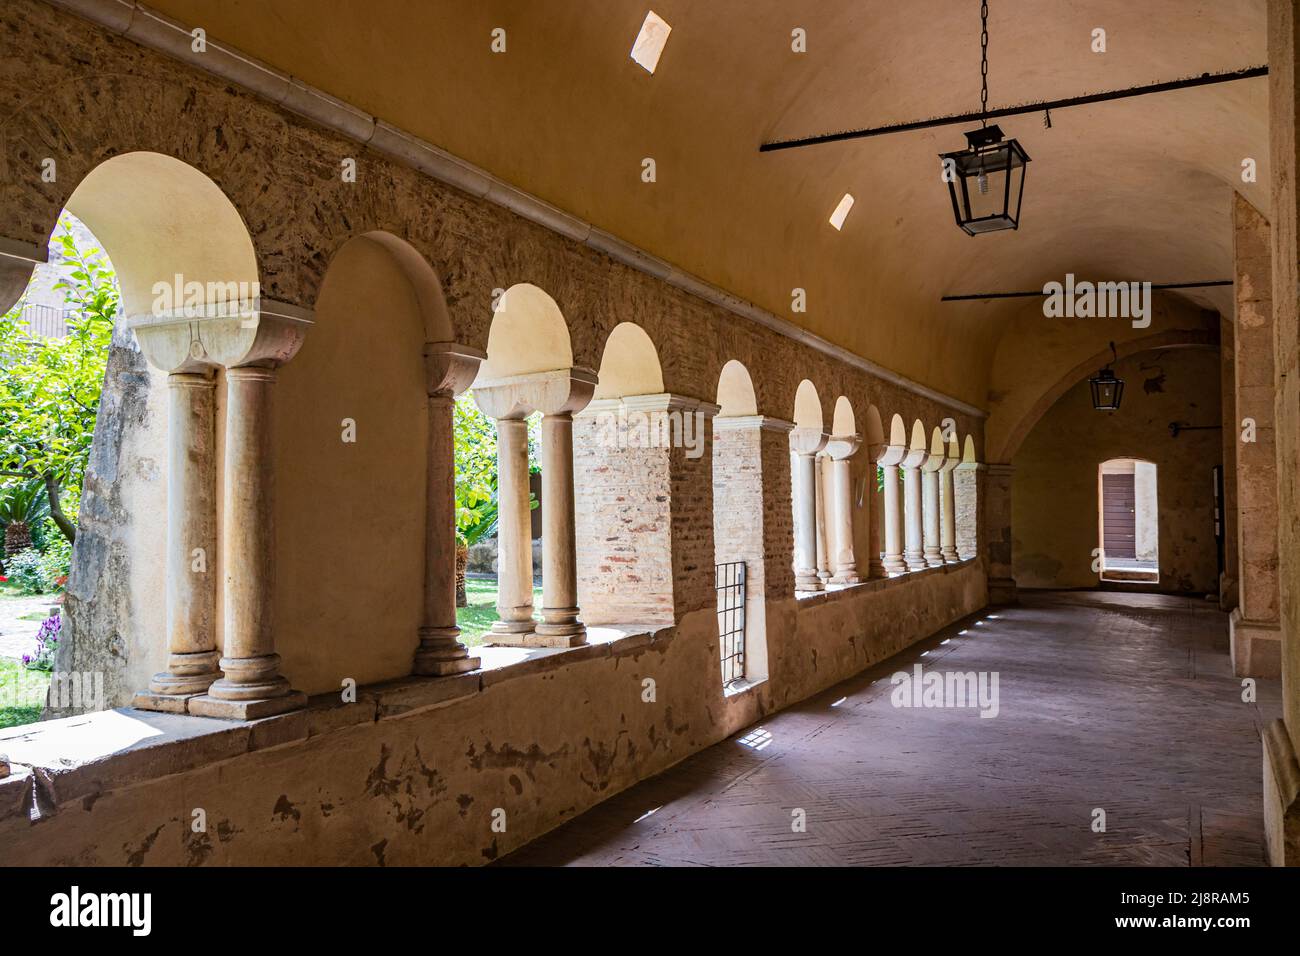 May 1, 2022 - Priverno, Latina, Lazio, Italy - The Fossanova Abbey. The cloister with its splendid colonnade, portico and barrel vaults. Twilight, sol Stock Photo